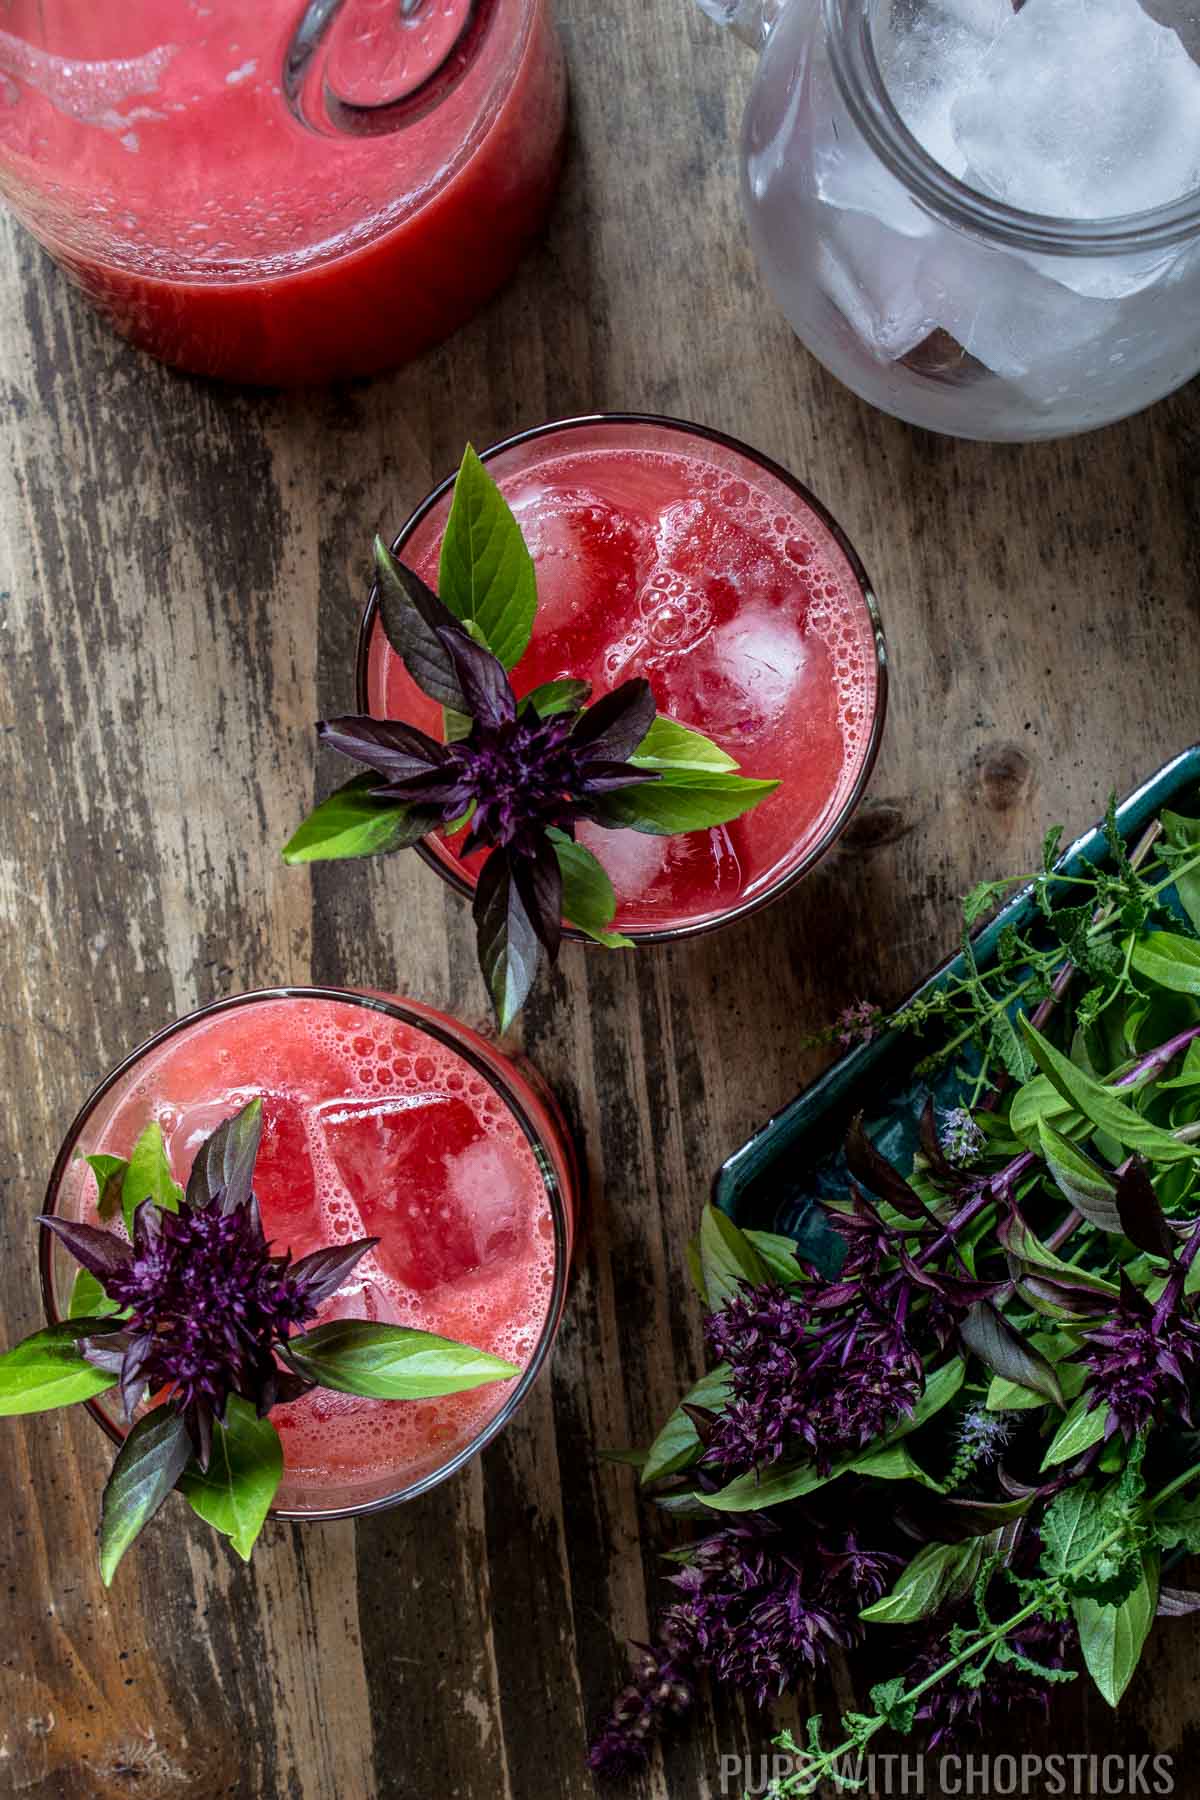 Two glasses of watermelon soju garnished with Thai basil and served with a jar of ice.